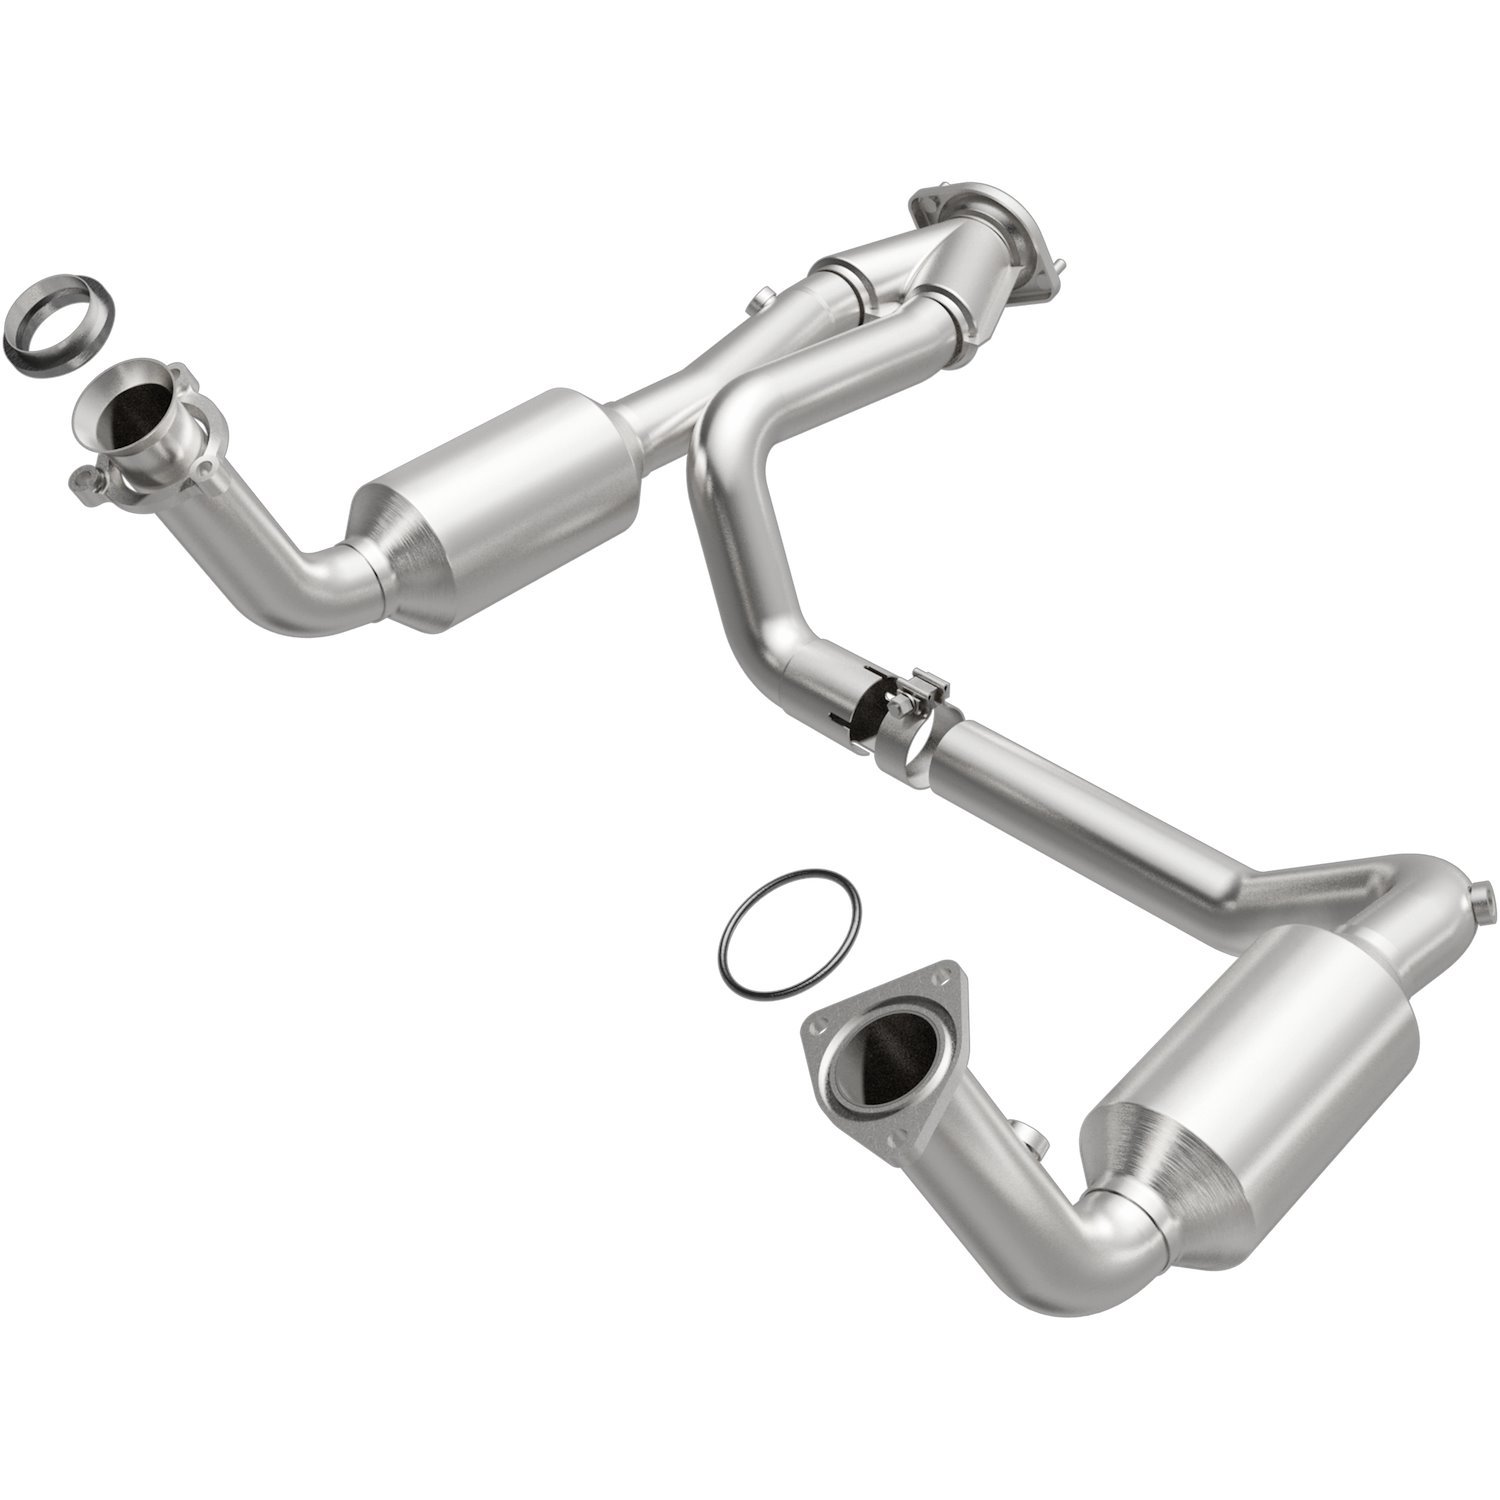 California Grade CARB Compliant Direct-Fit Catalytic Converter 1993-2003 GM 1500 Truck